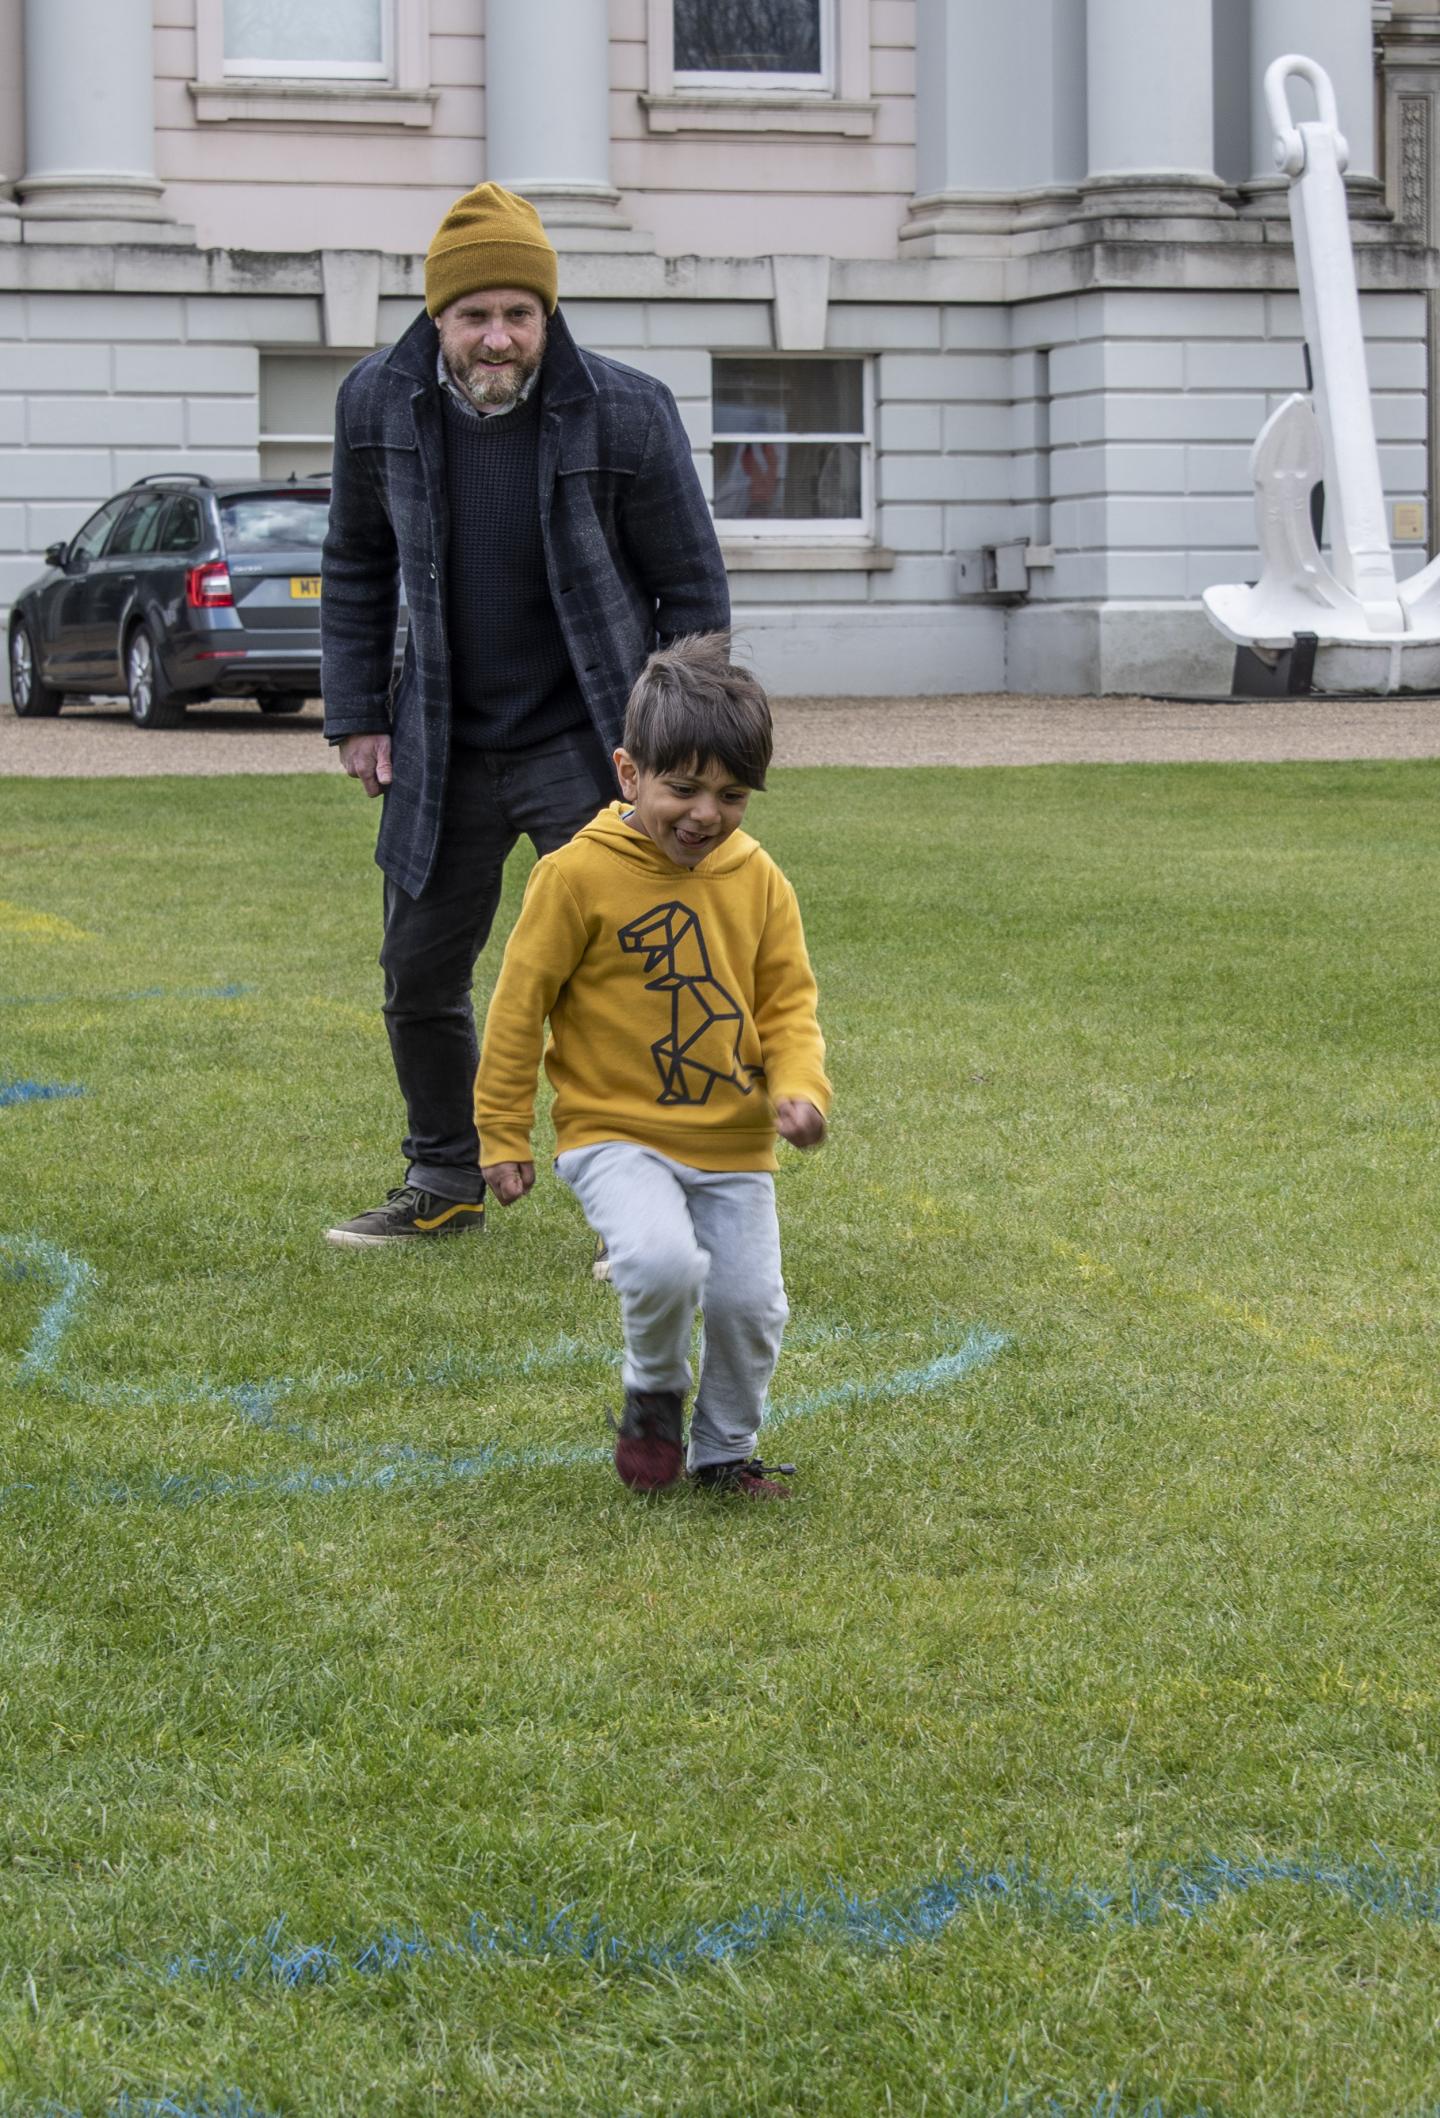 A child and adult are following chalked lines on the grass.